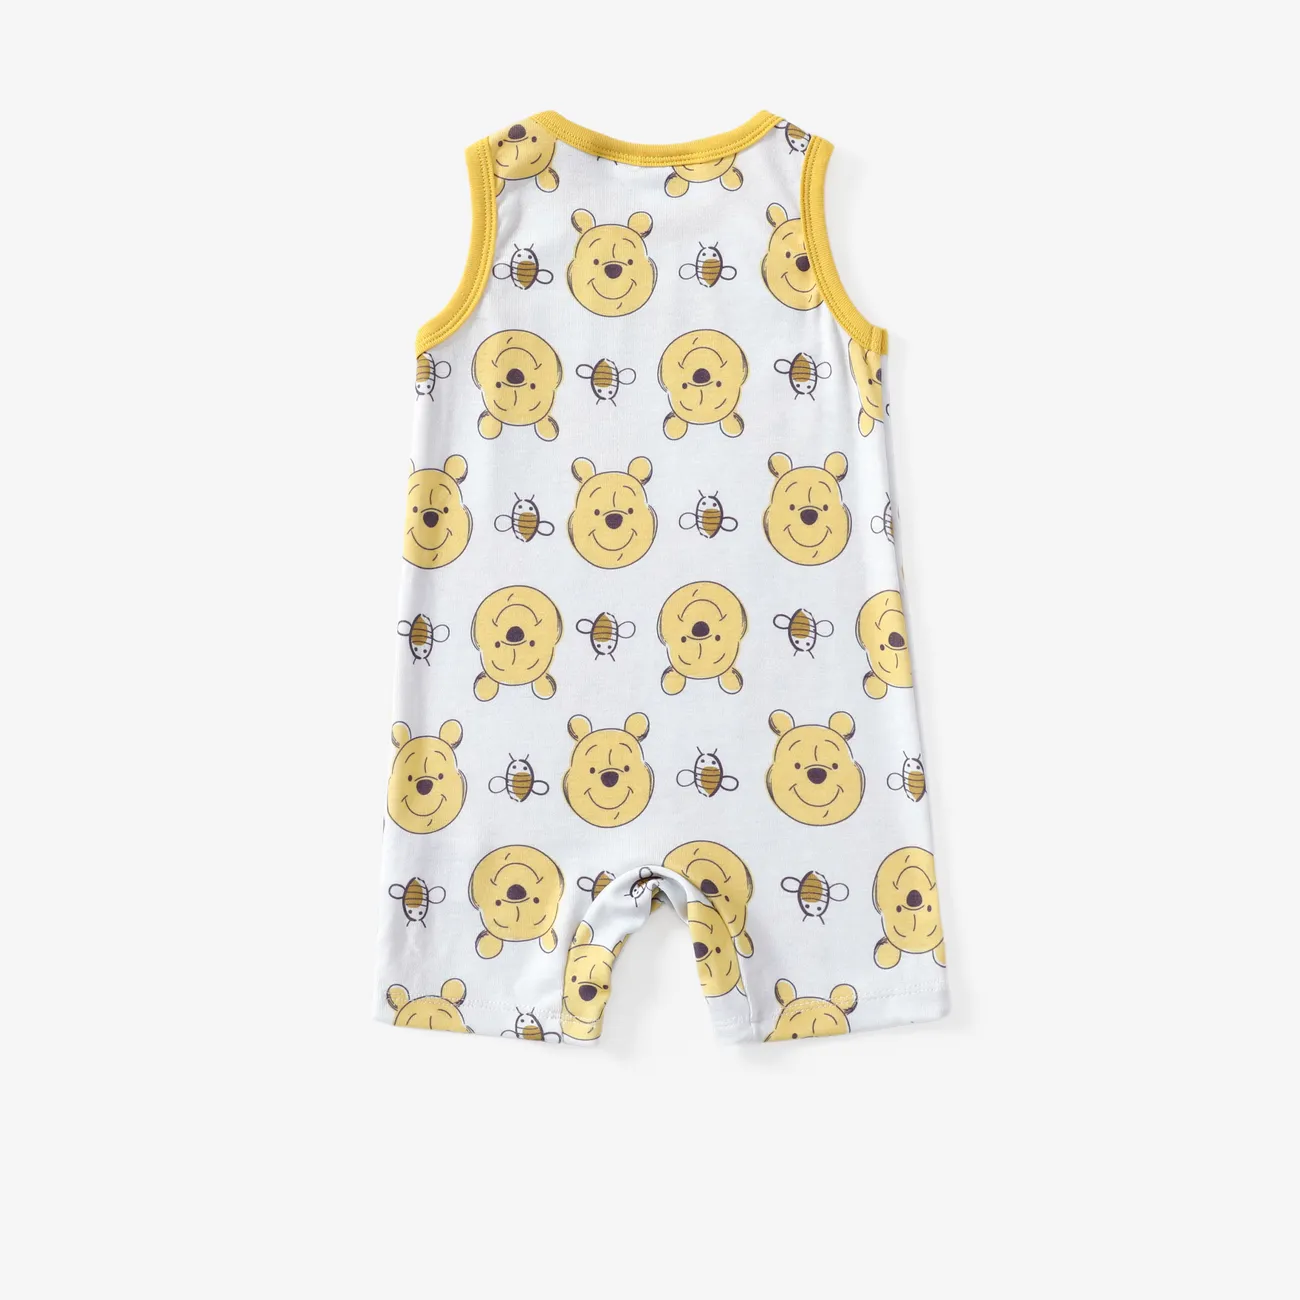 Disney Winnie the Pooh Baby Boys/Girls 1pc Naia™ Character All-over Print Short-sleeve Romper Yellow big image 1